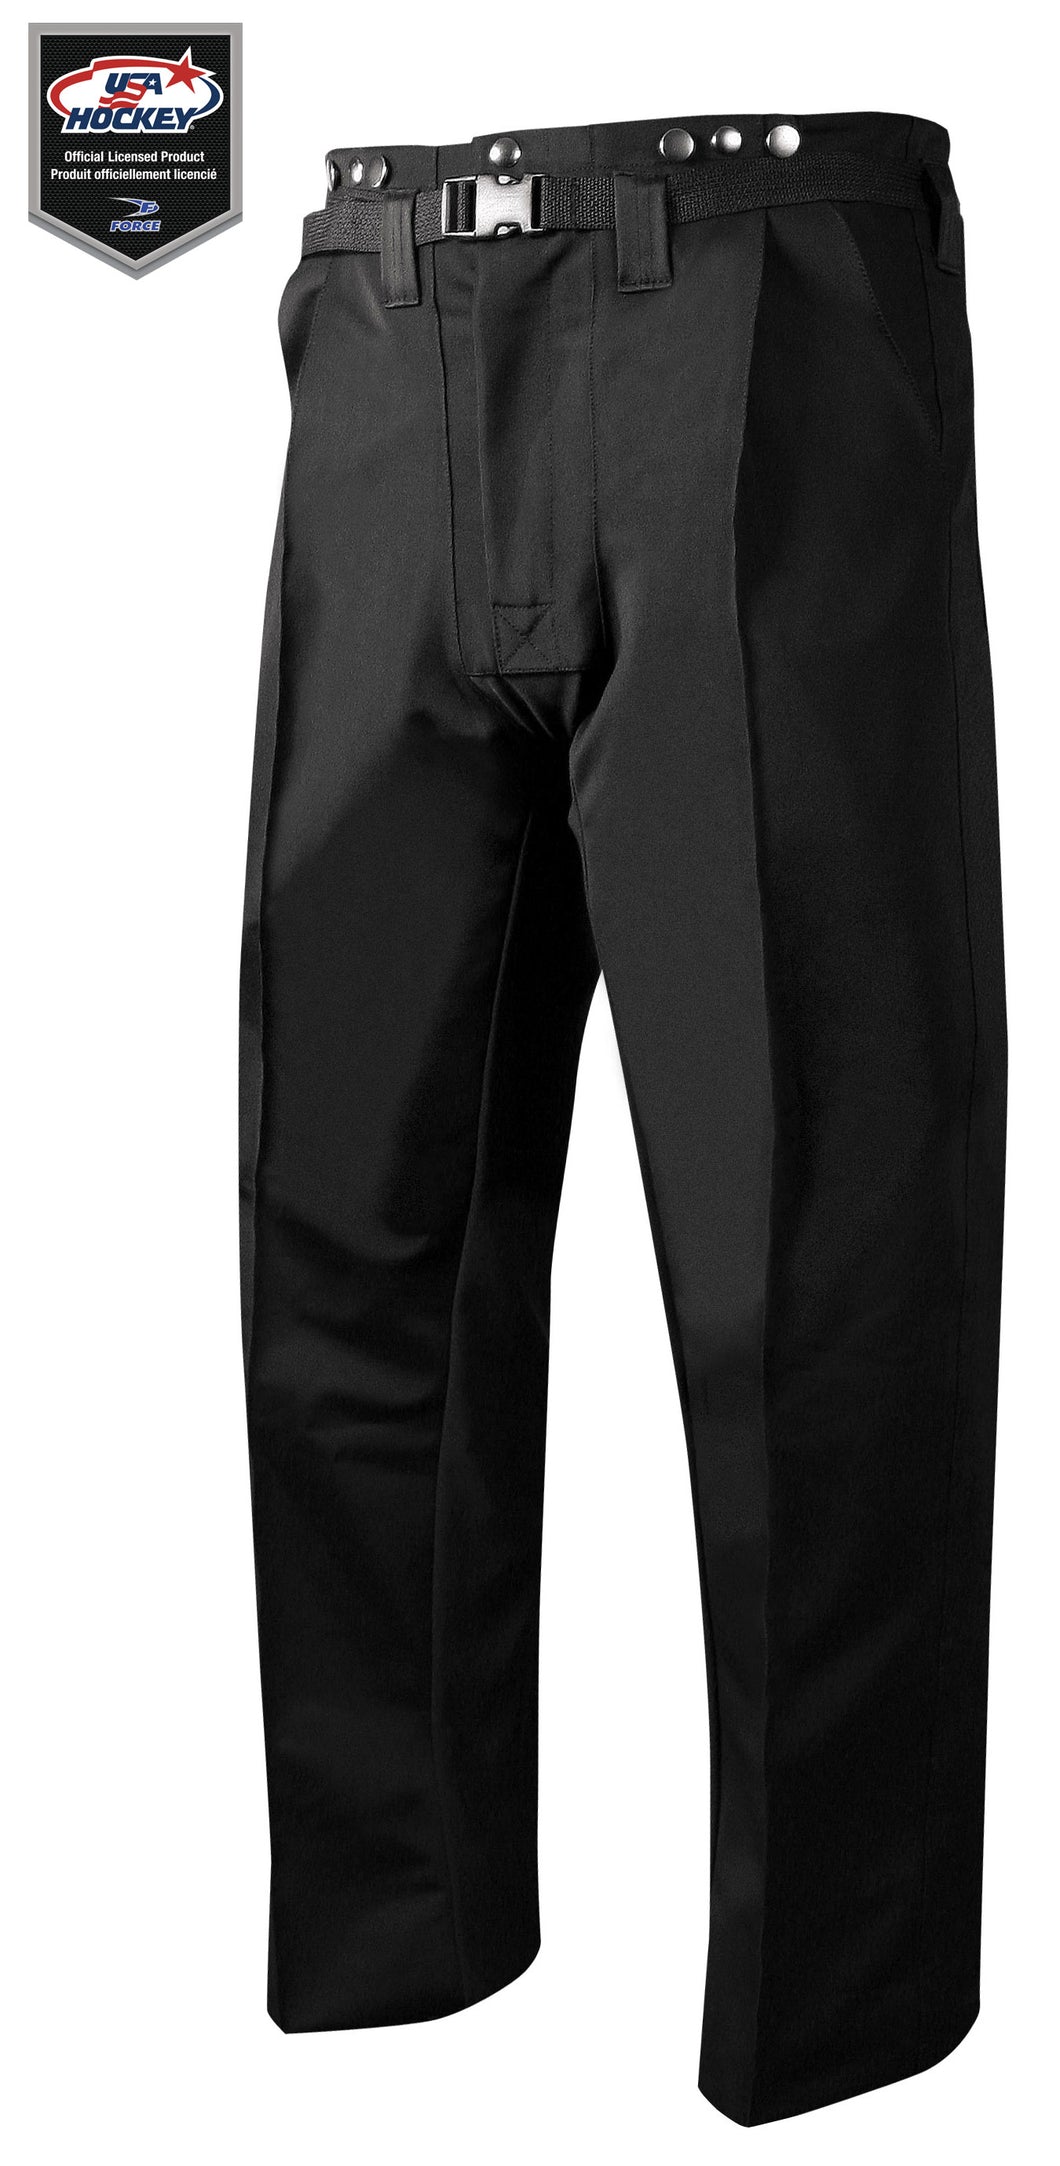 USA Force PRO Officiating Pant